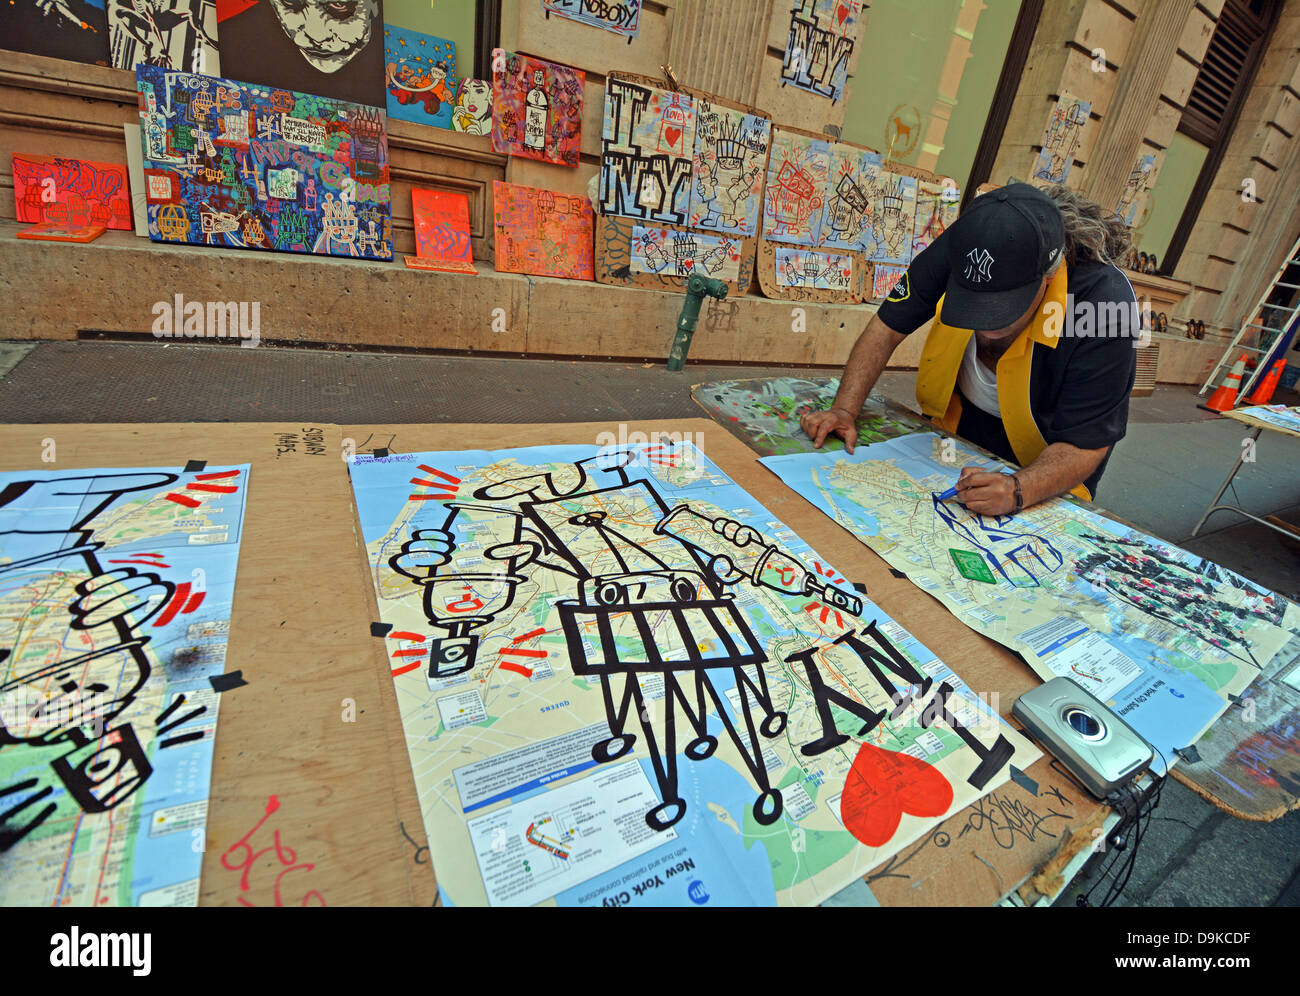 Portrait Of Graffiti Artist Ivan Who Paints On Subway Maps And Sells D9KCDF 